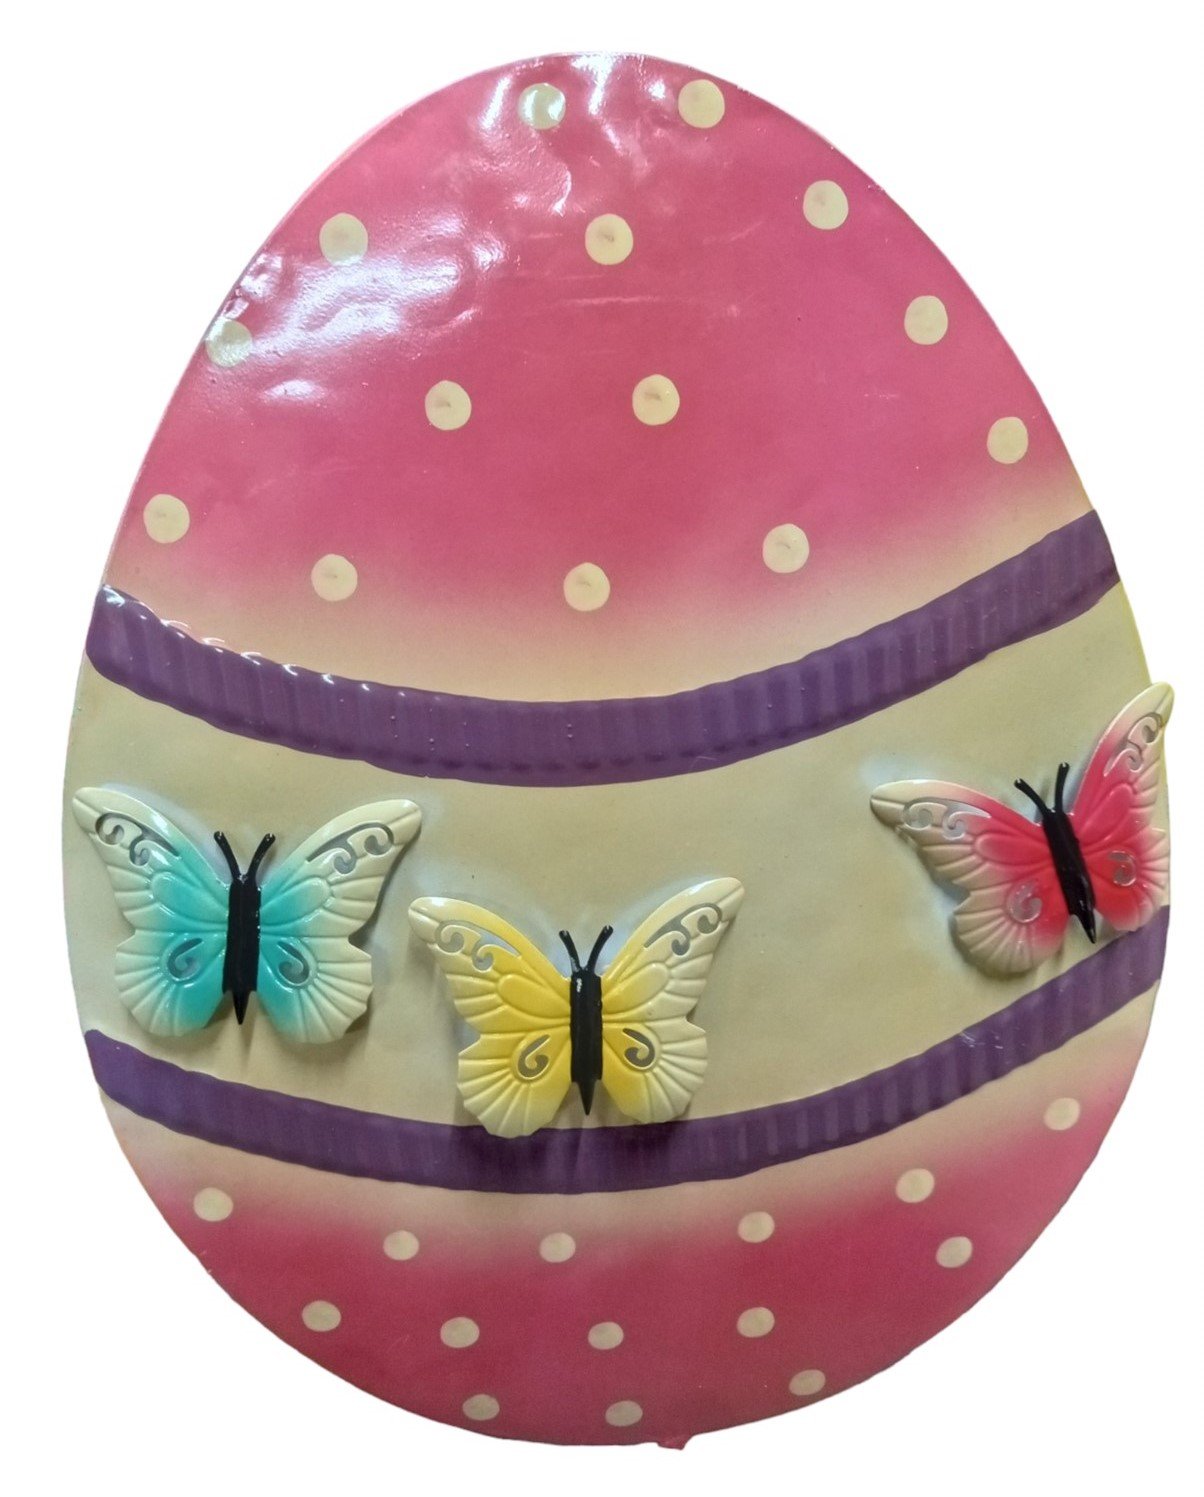 Handcrafted Pink Metal Easter Egg Yard Art Holiday Decorative Outdoor Yard Decor